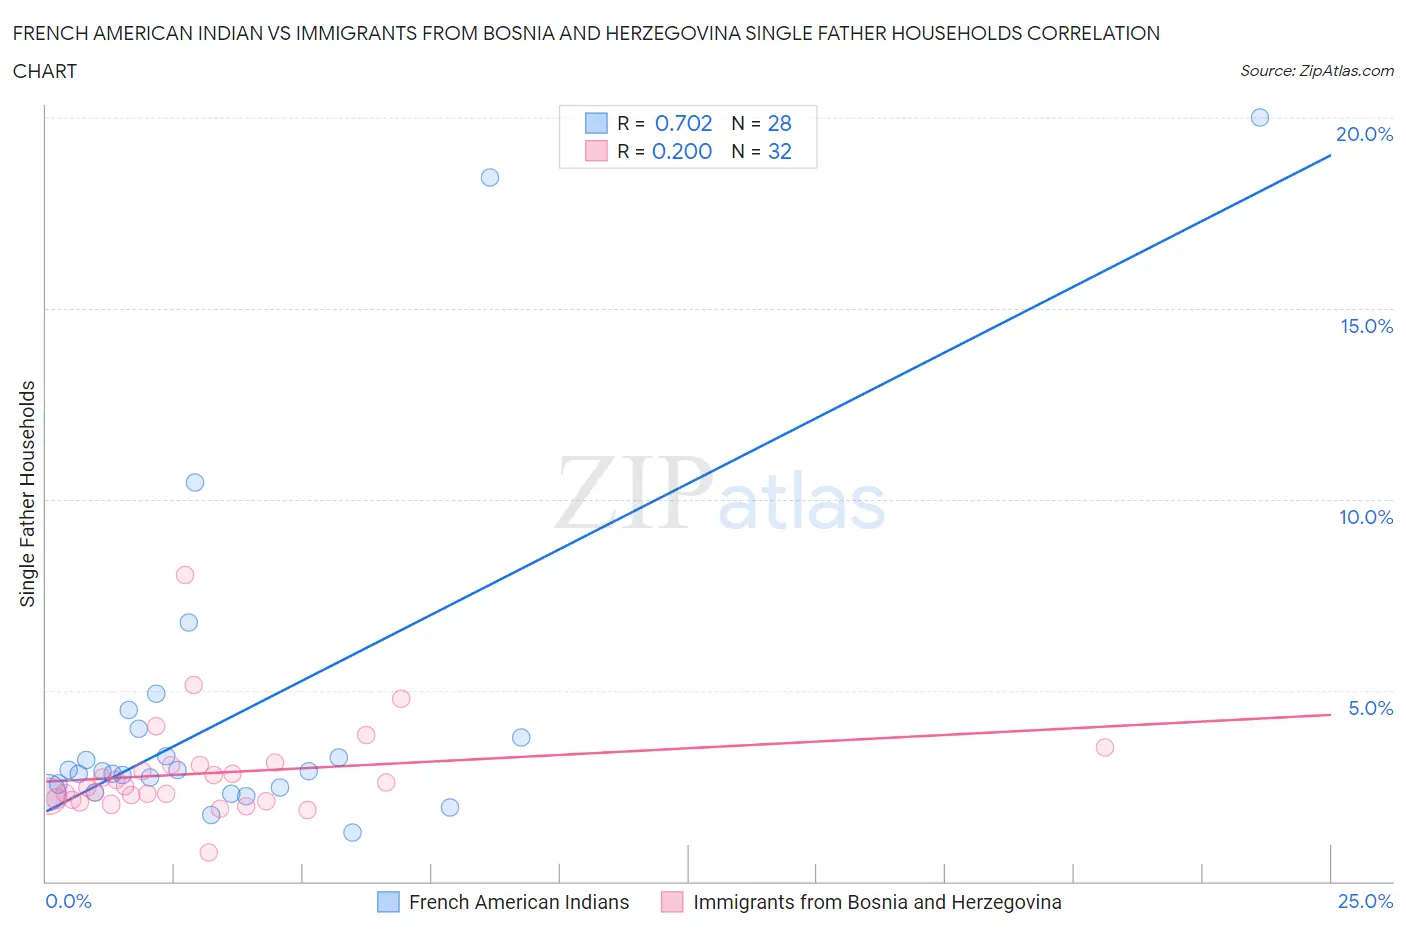 French American Indian vs Immigrants from Bosnia and Herzegovina Single Father Households